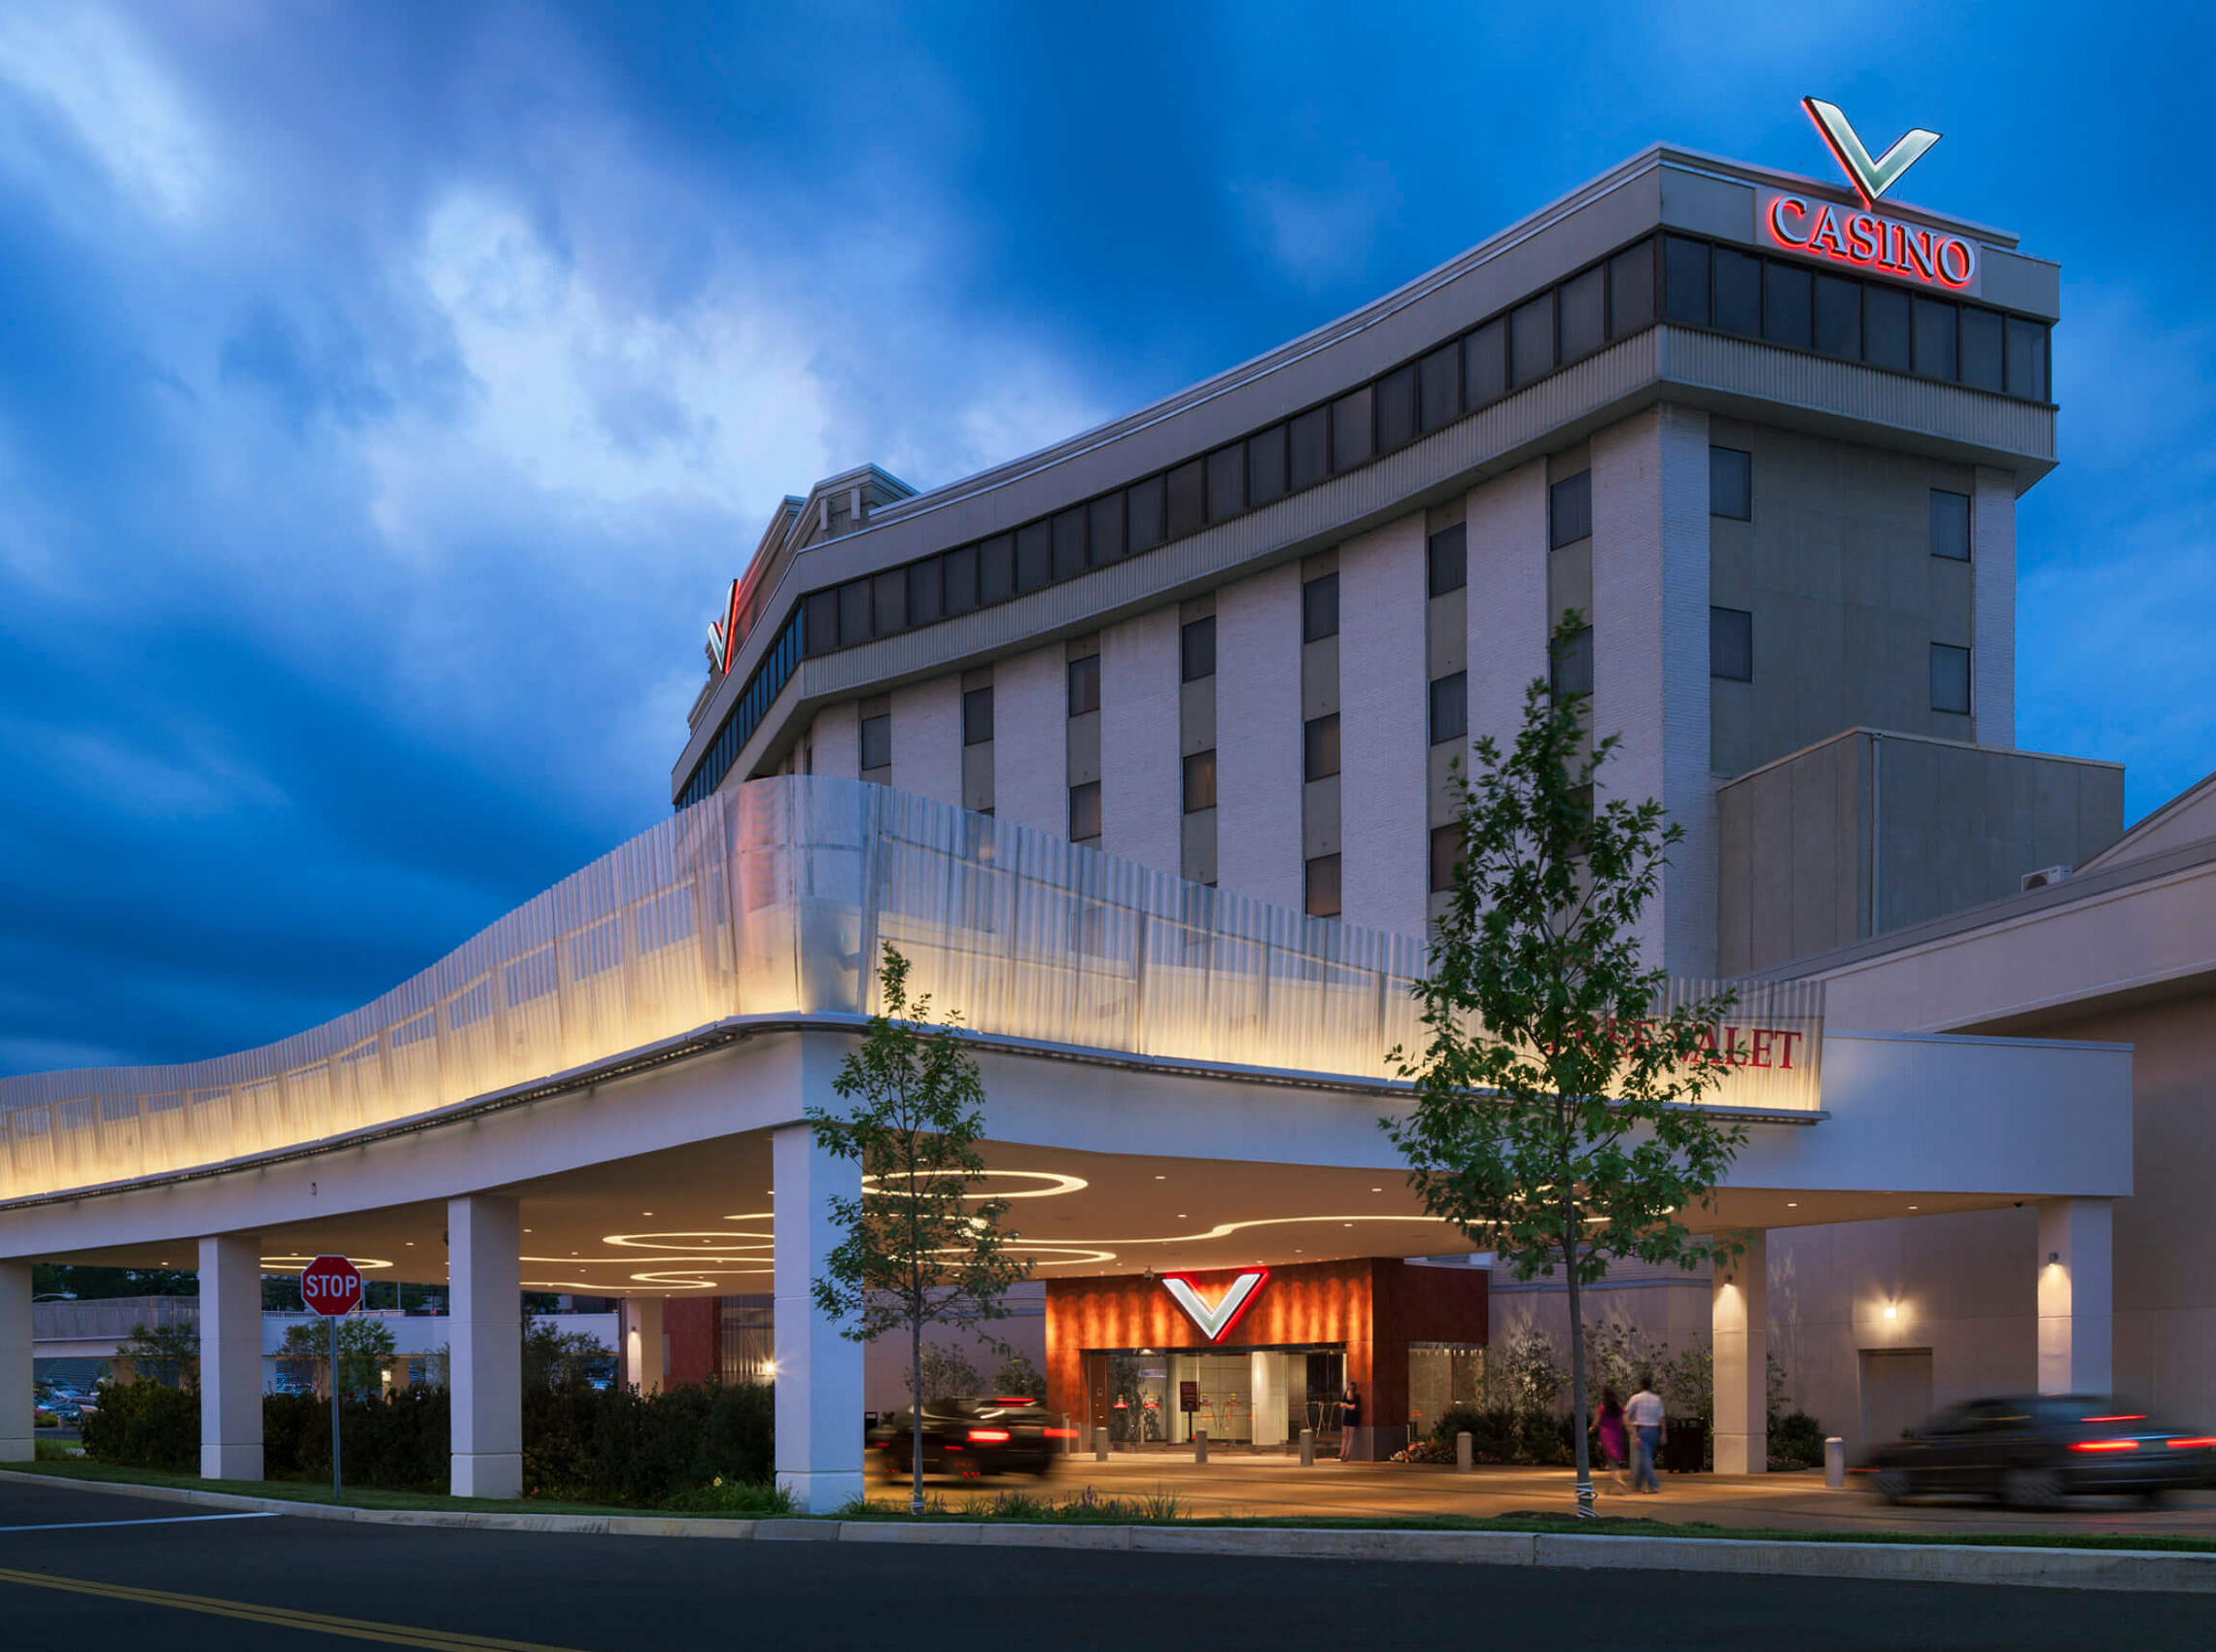 Valley Forge Casino